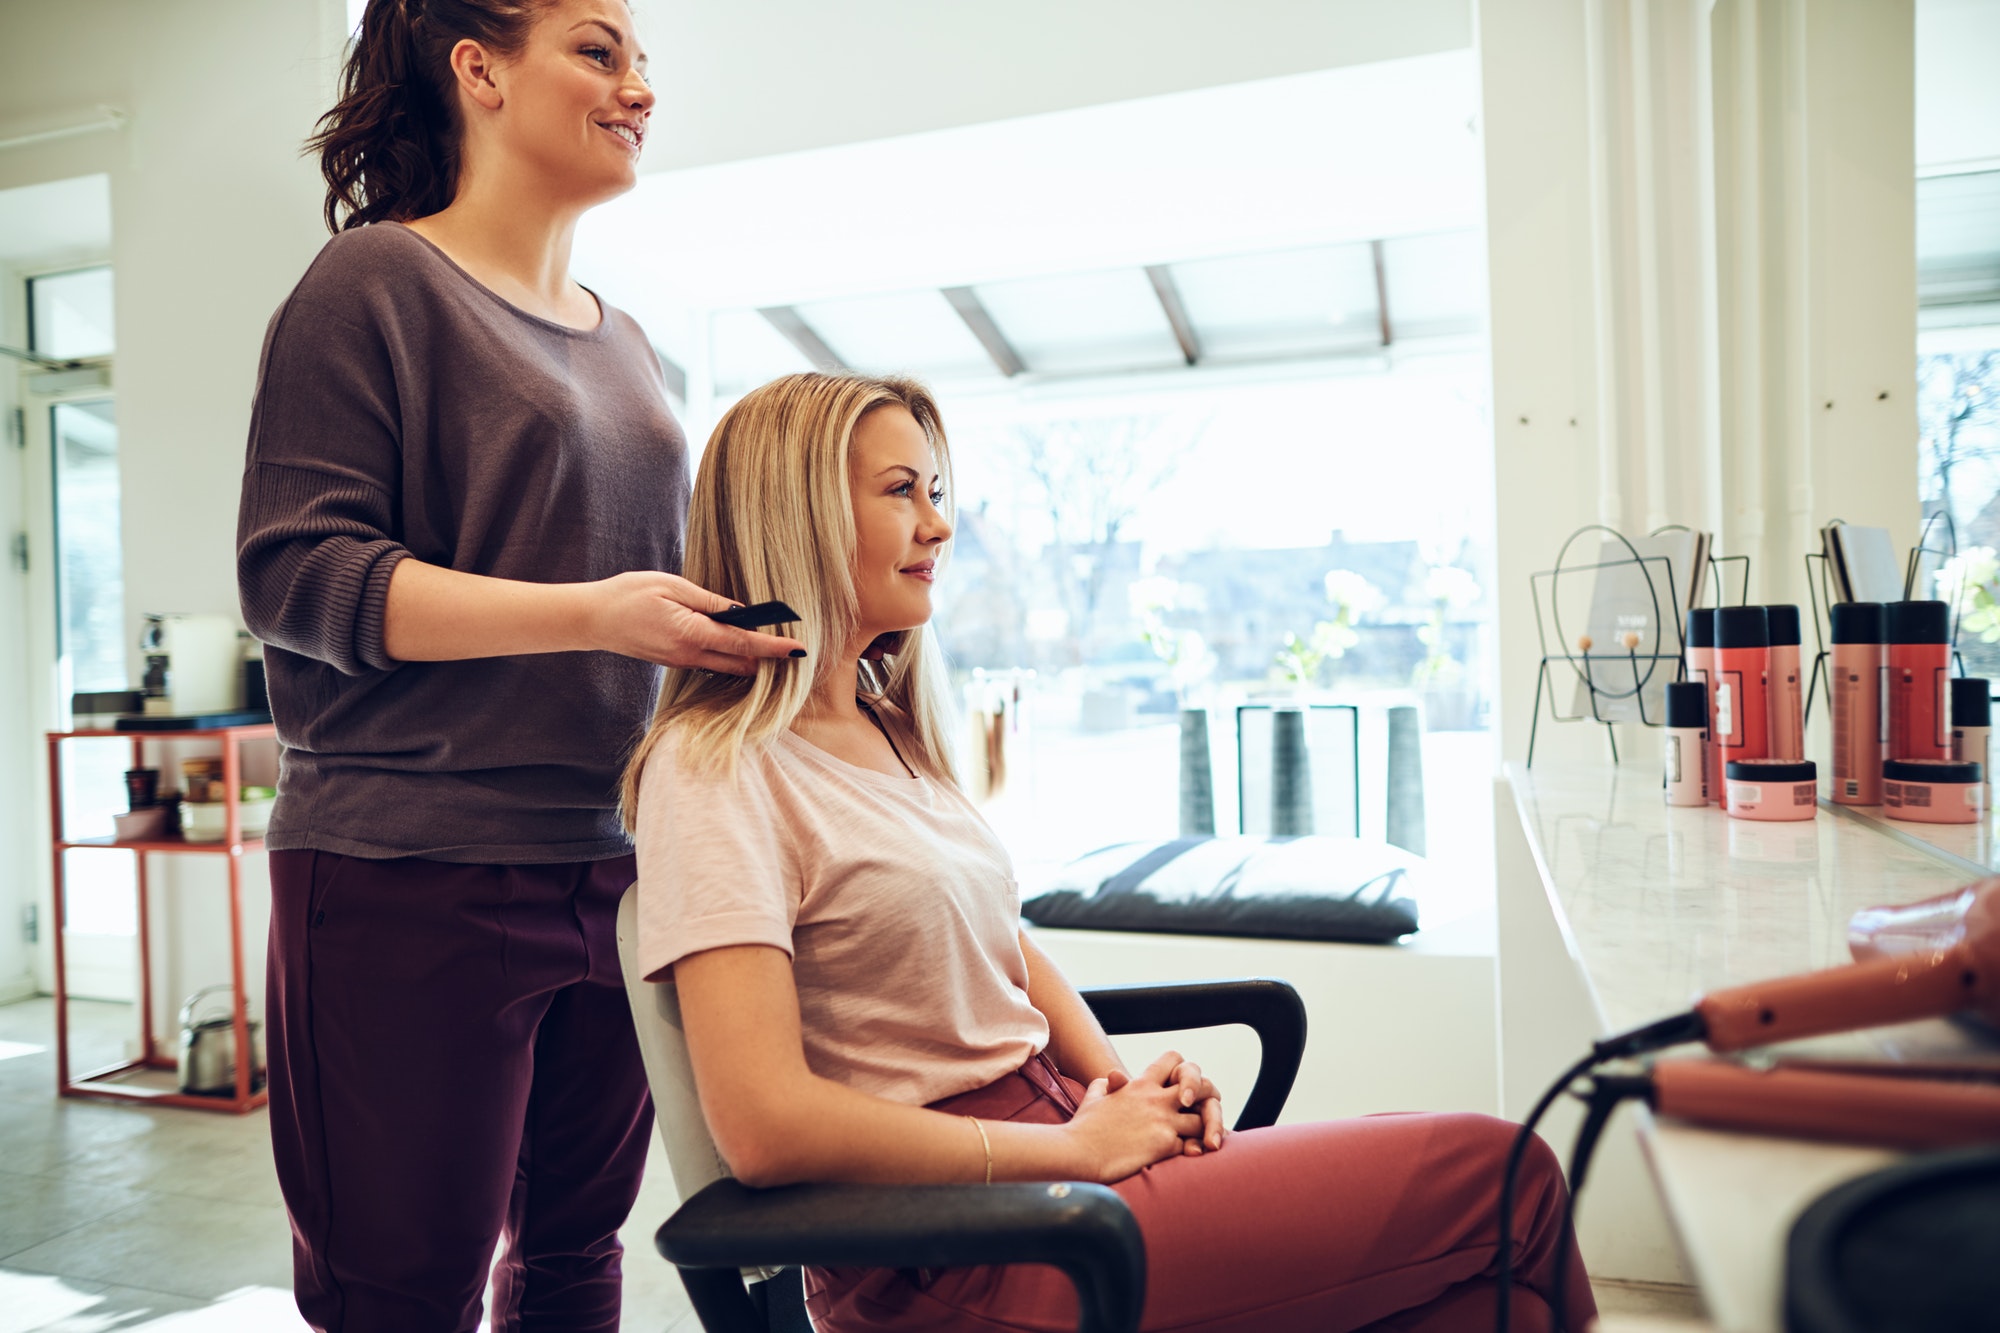 Smiling woman talking with her hairstylist in a salon